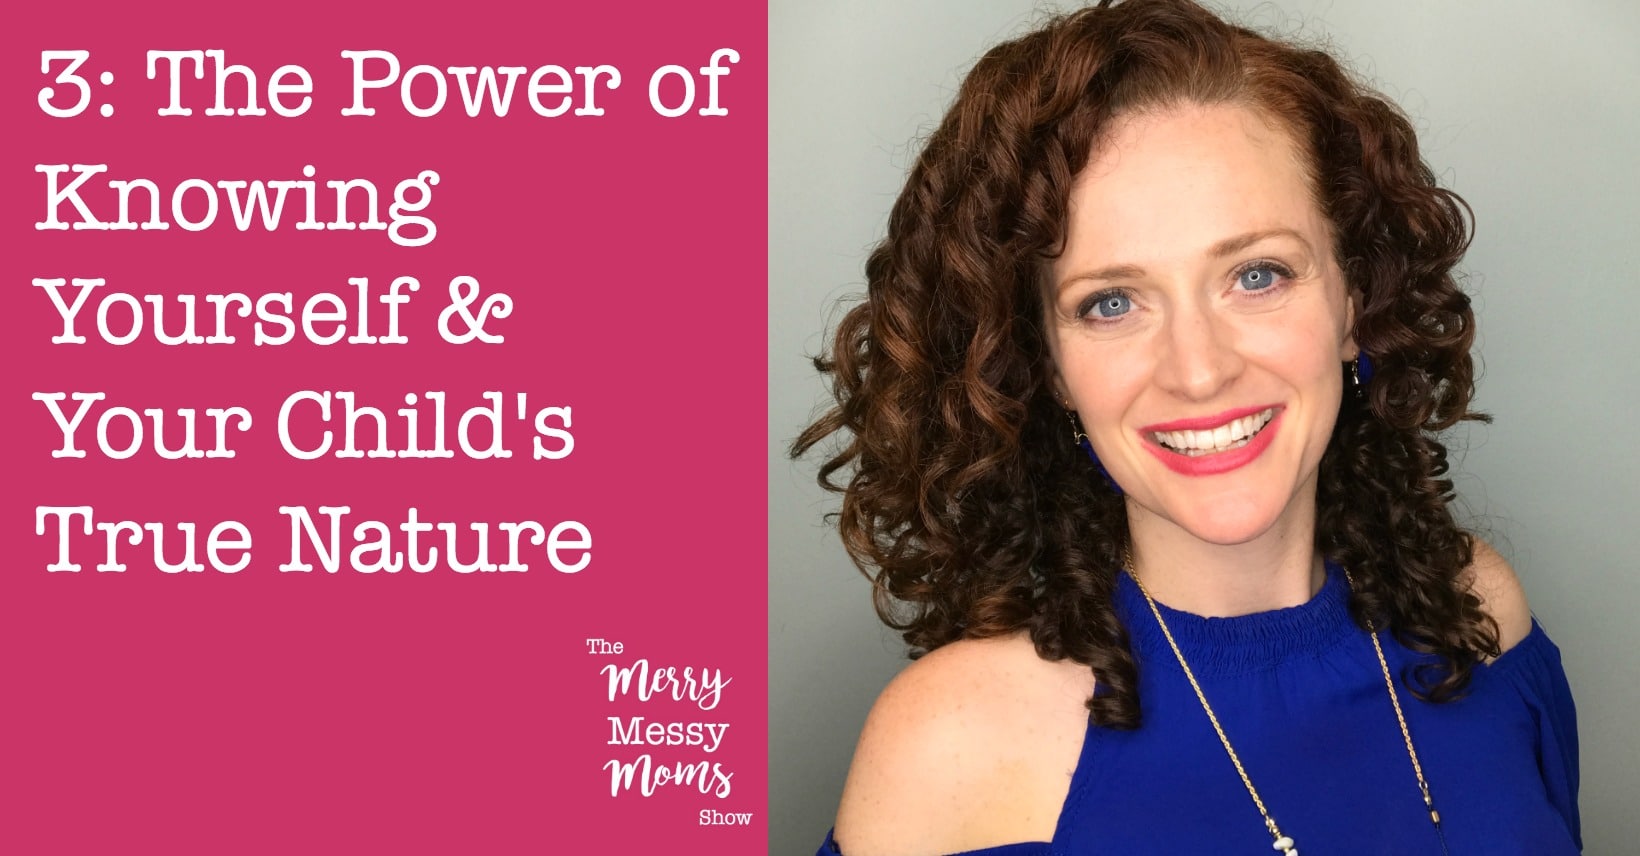 Live Your Truth and Learn Your Child's True Nature - The Merry Messy Moms Show